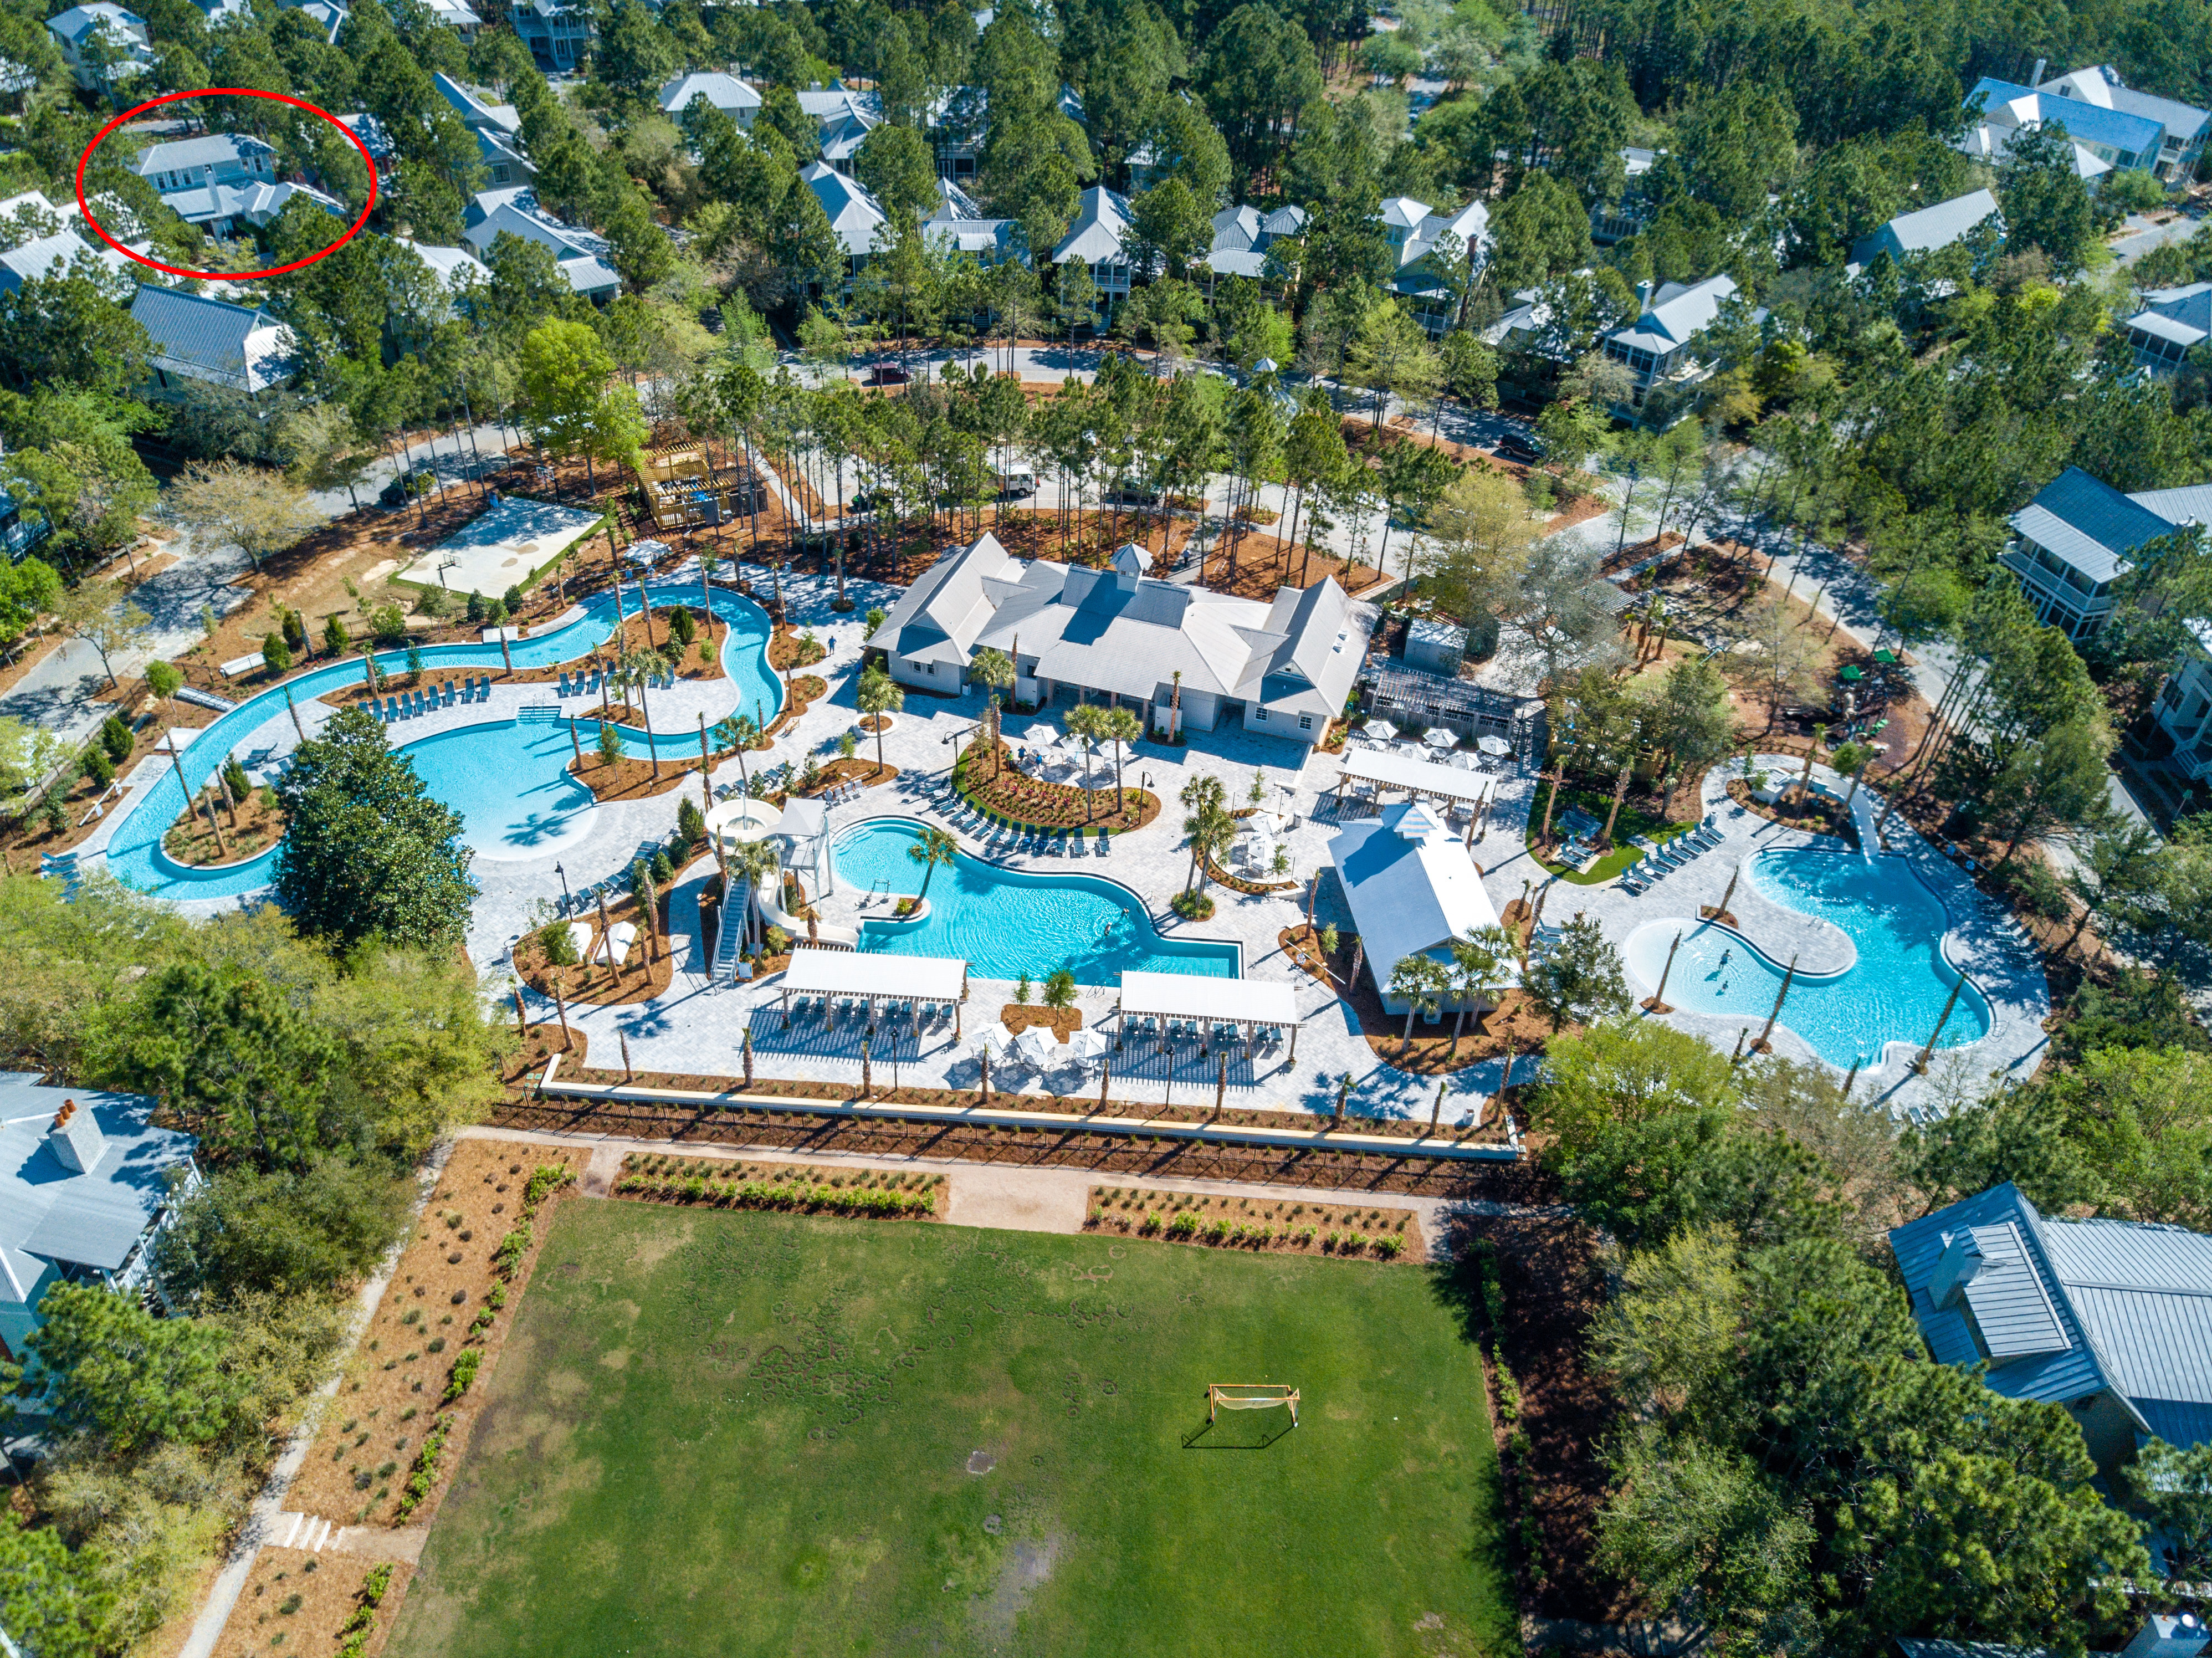 An aerial view of Camp Watercolor showing the pools and lazy river